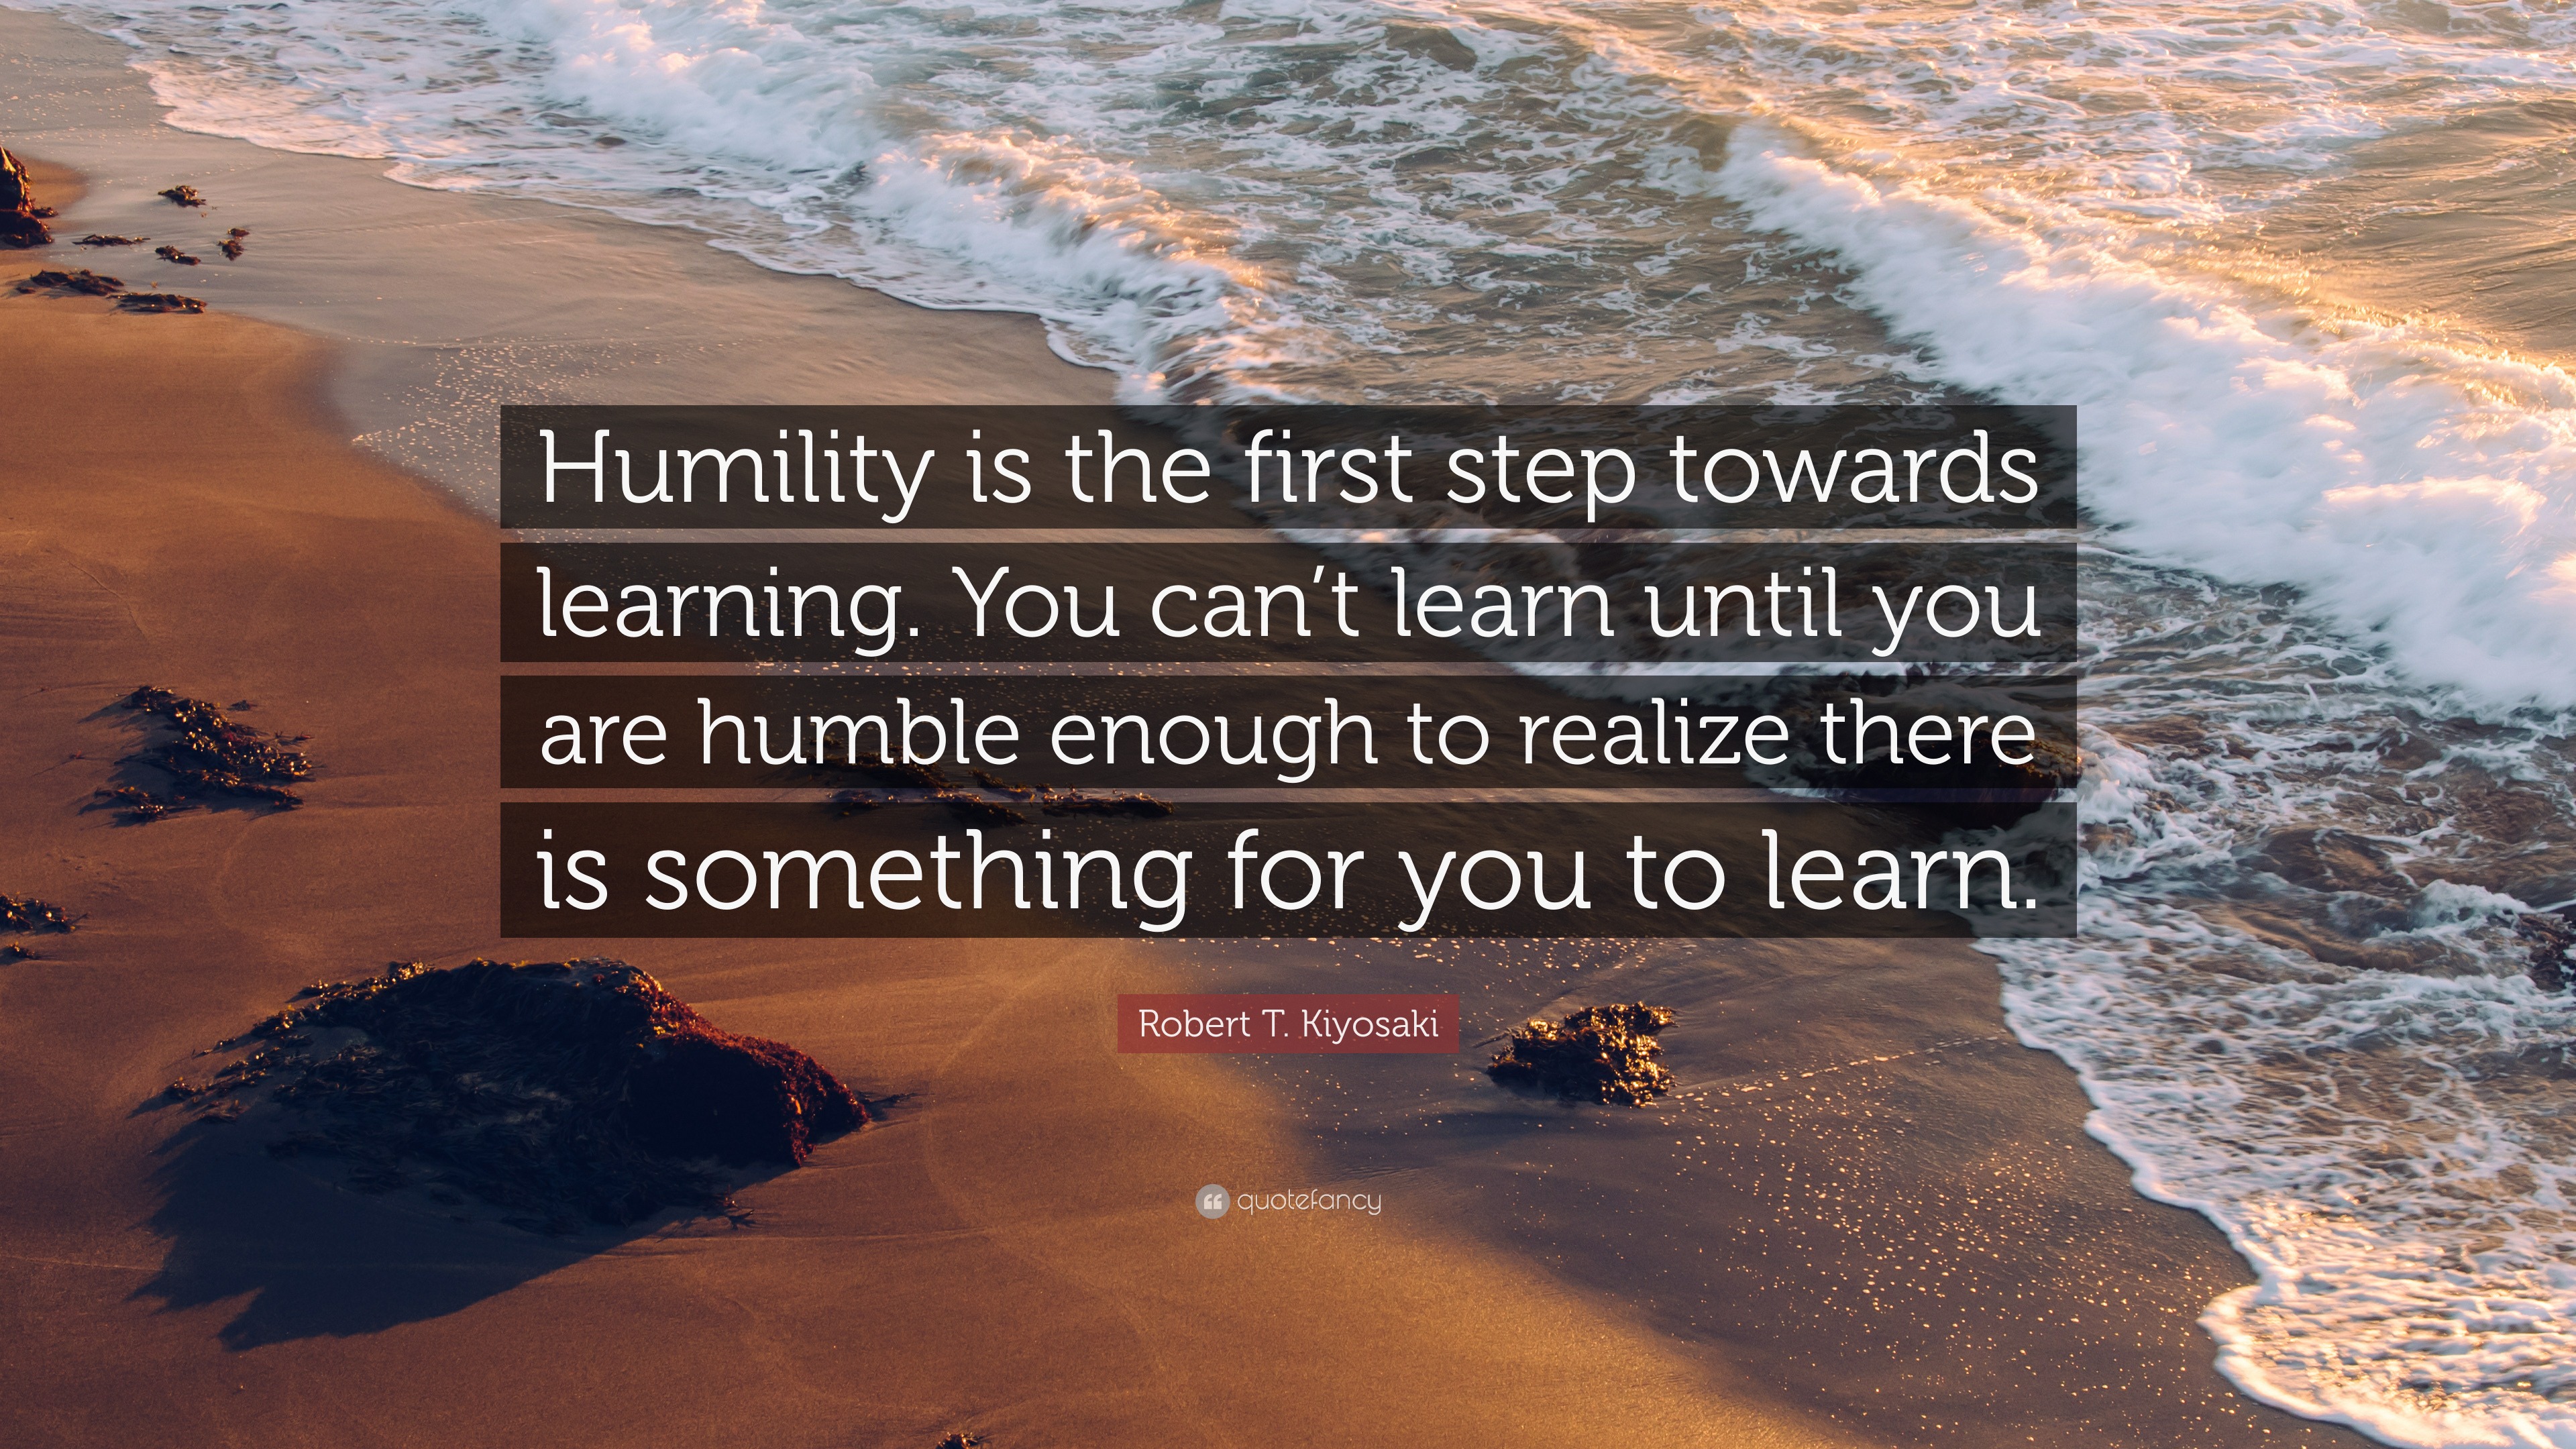 What are the greatest humility quotes?